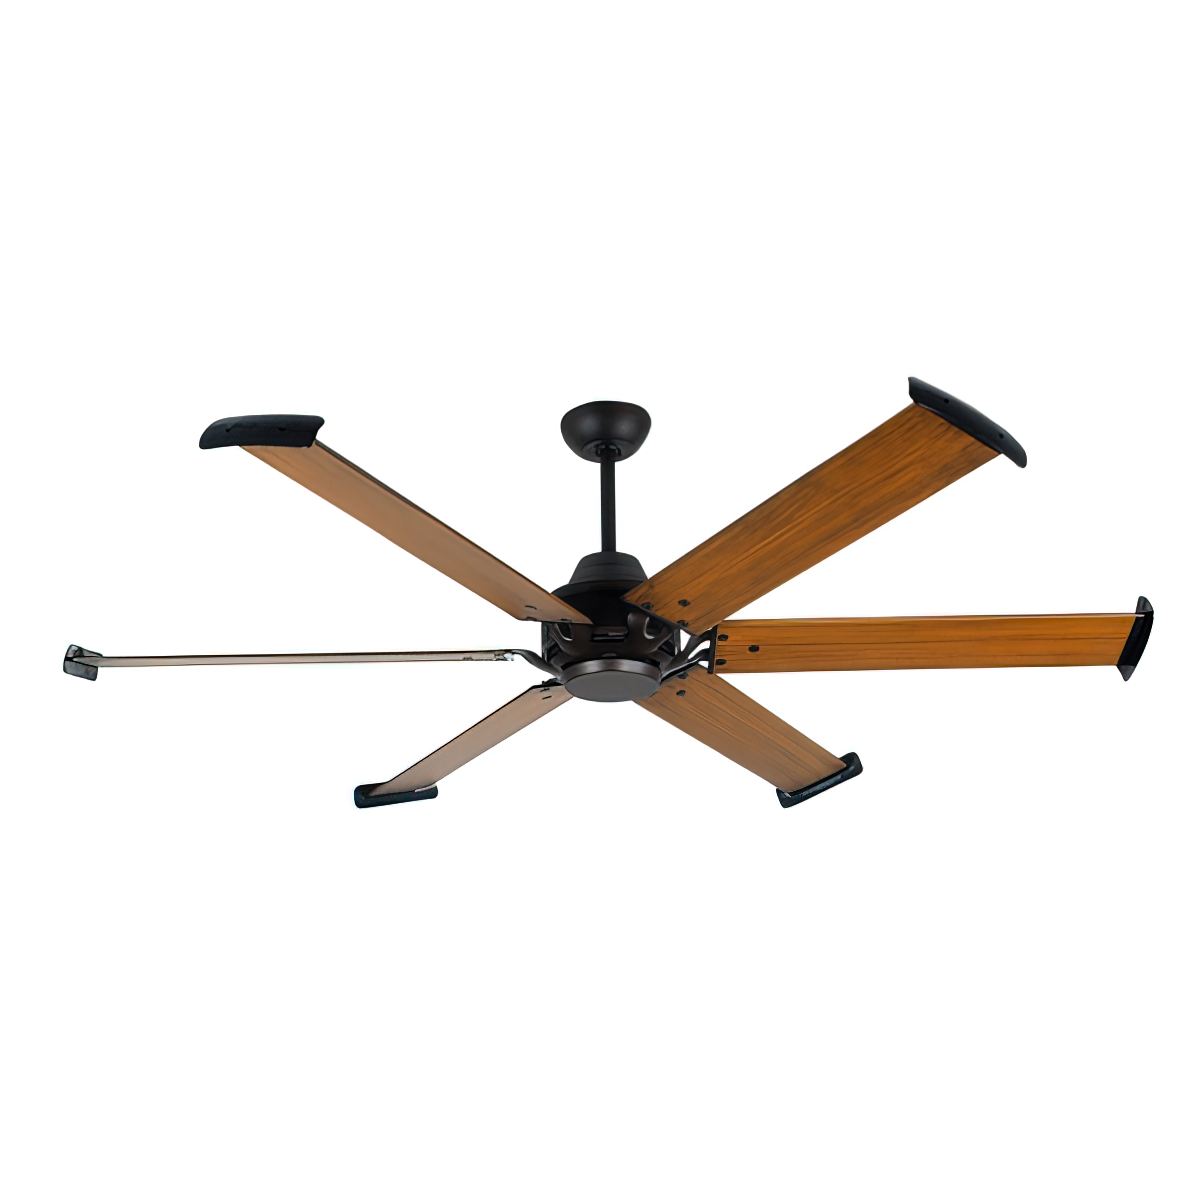 Top Taiwan’s Signature 6-Blade Ceiling Fan